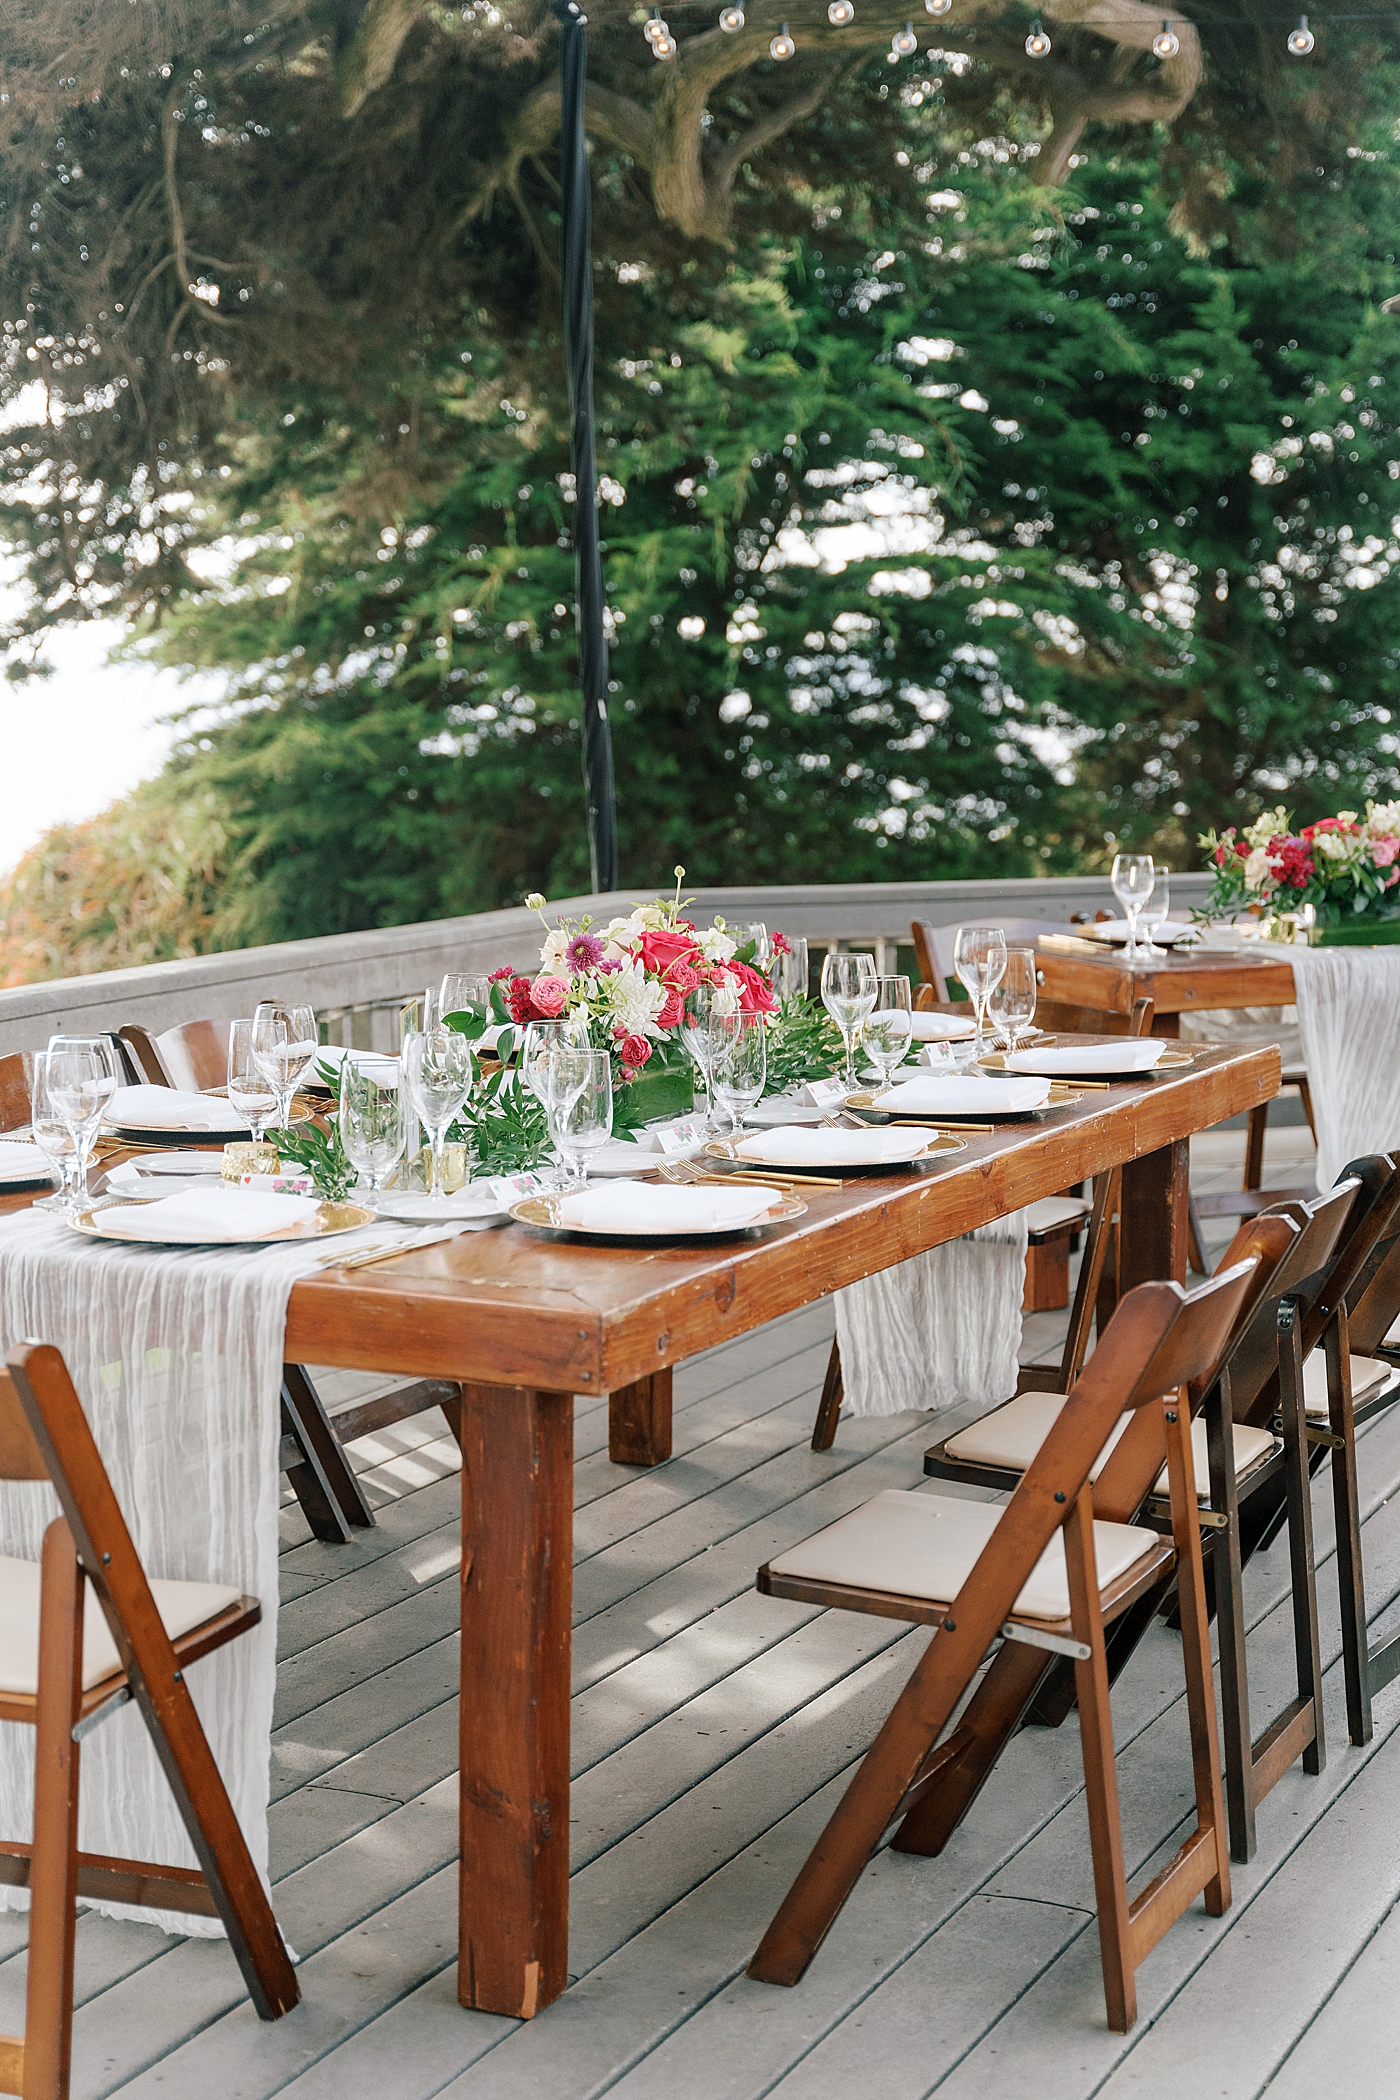 Detail of a wooden wedding dinner table with wooden folding chairs and white table runner | Image by San Diego Wedding Photographer Hope Helmuth